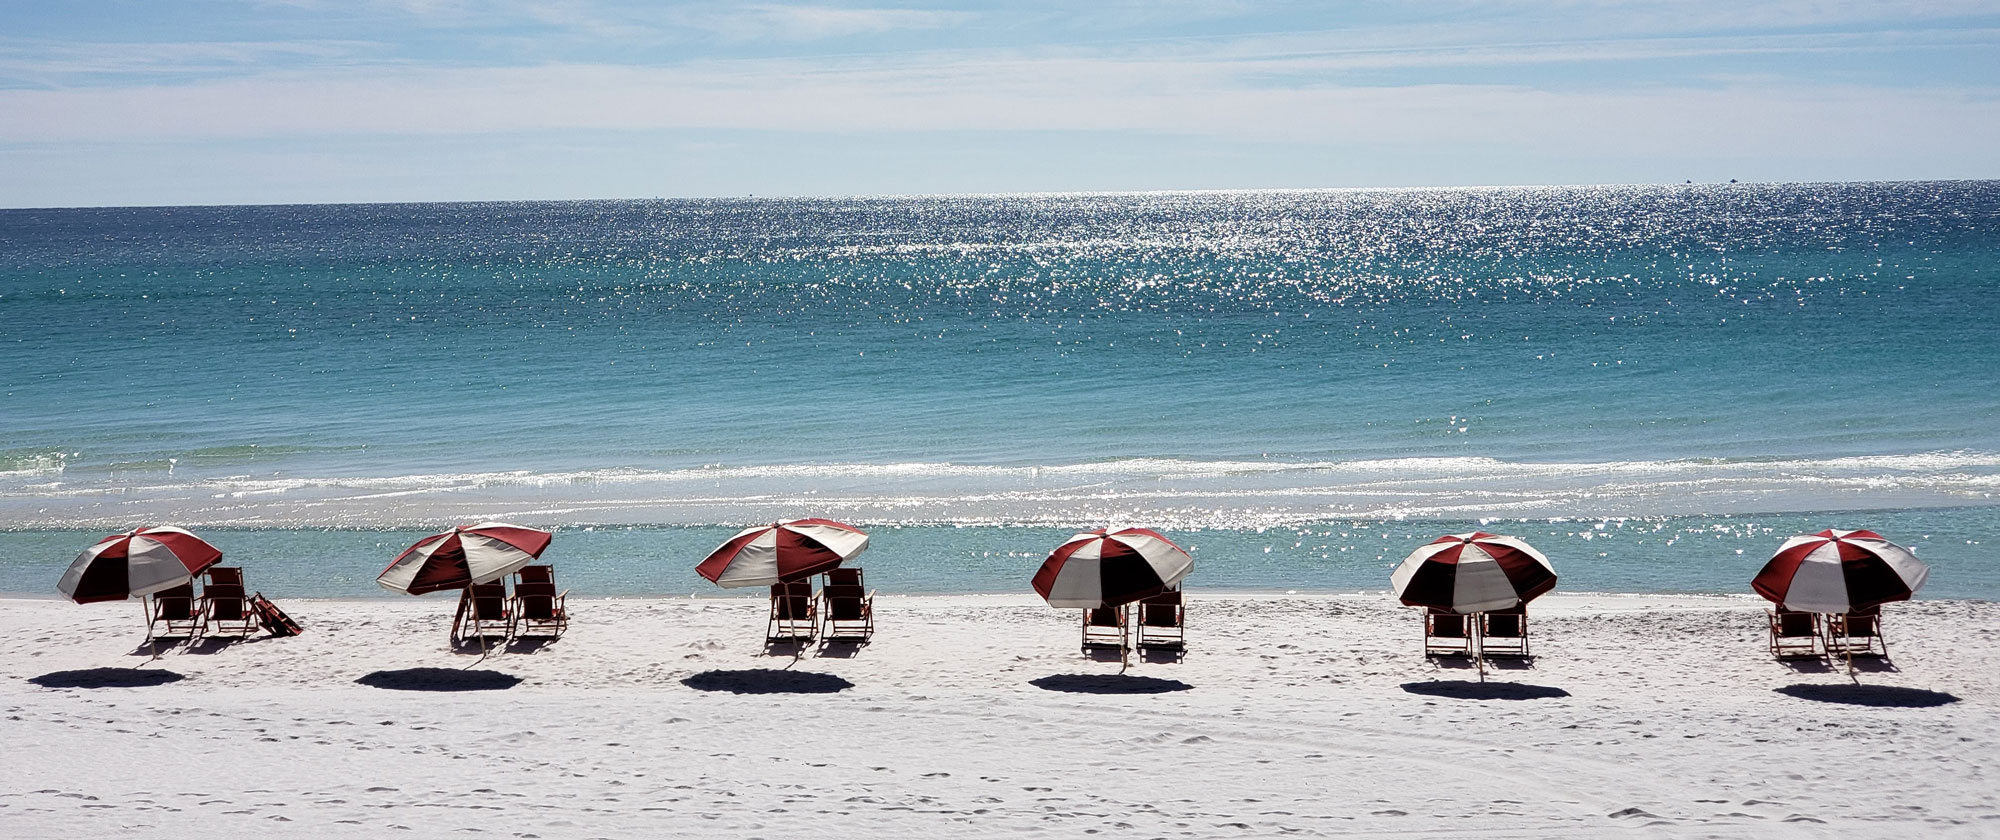 Beach and ocean with 12 sun-bathing chairs and 6 red-white umbrellas